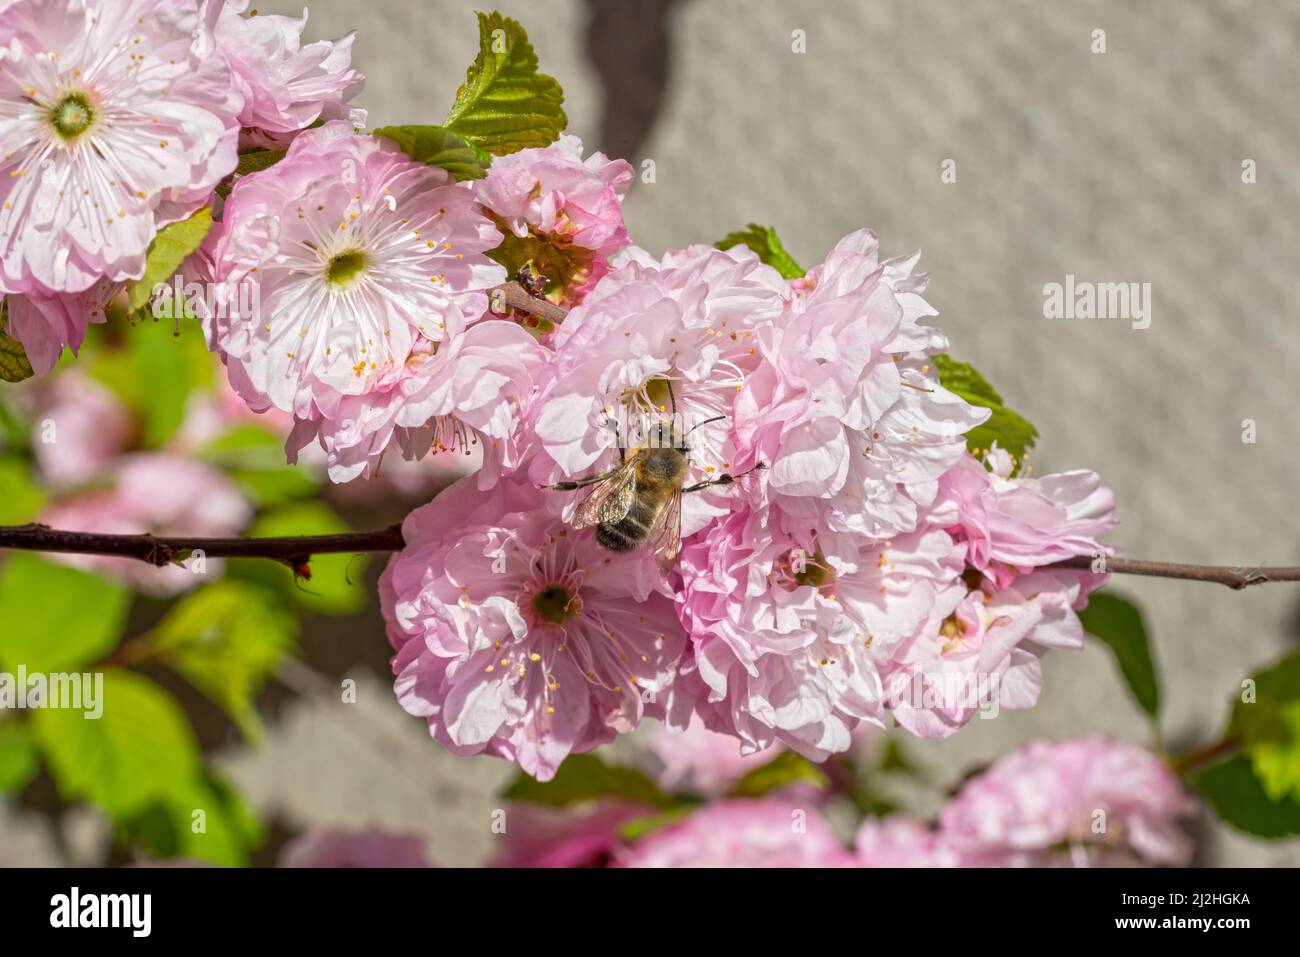 The bees are drinking nectar from the pink Prunus triloba flowers. Stock Photo